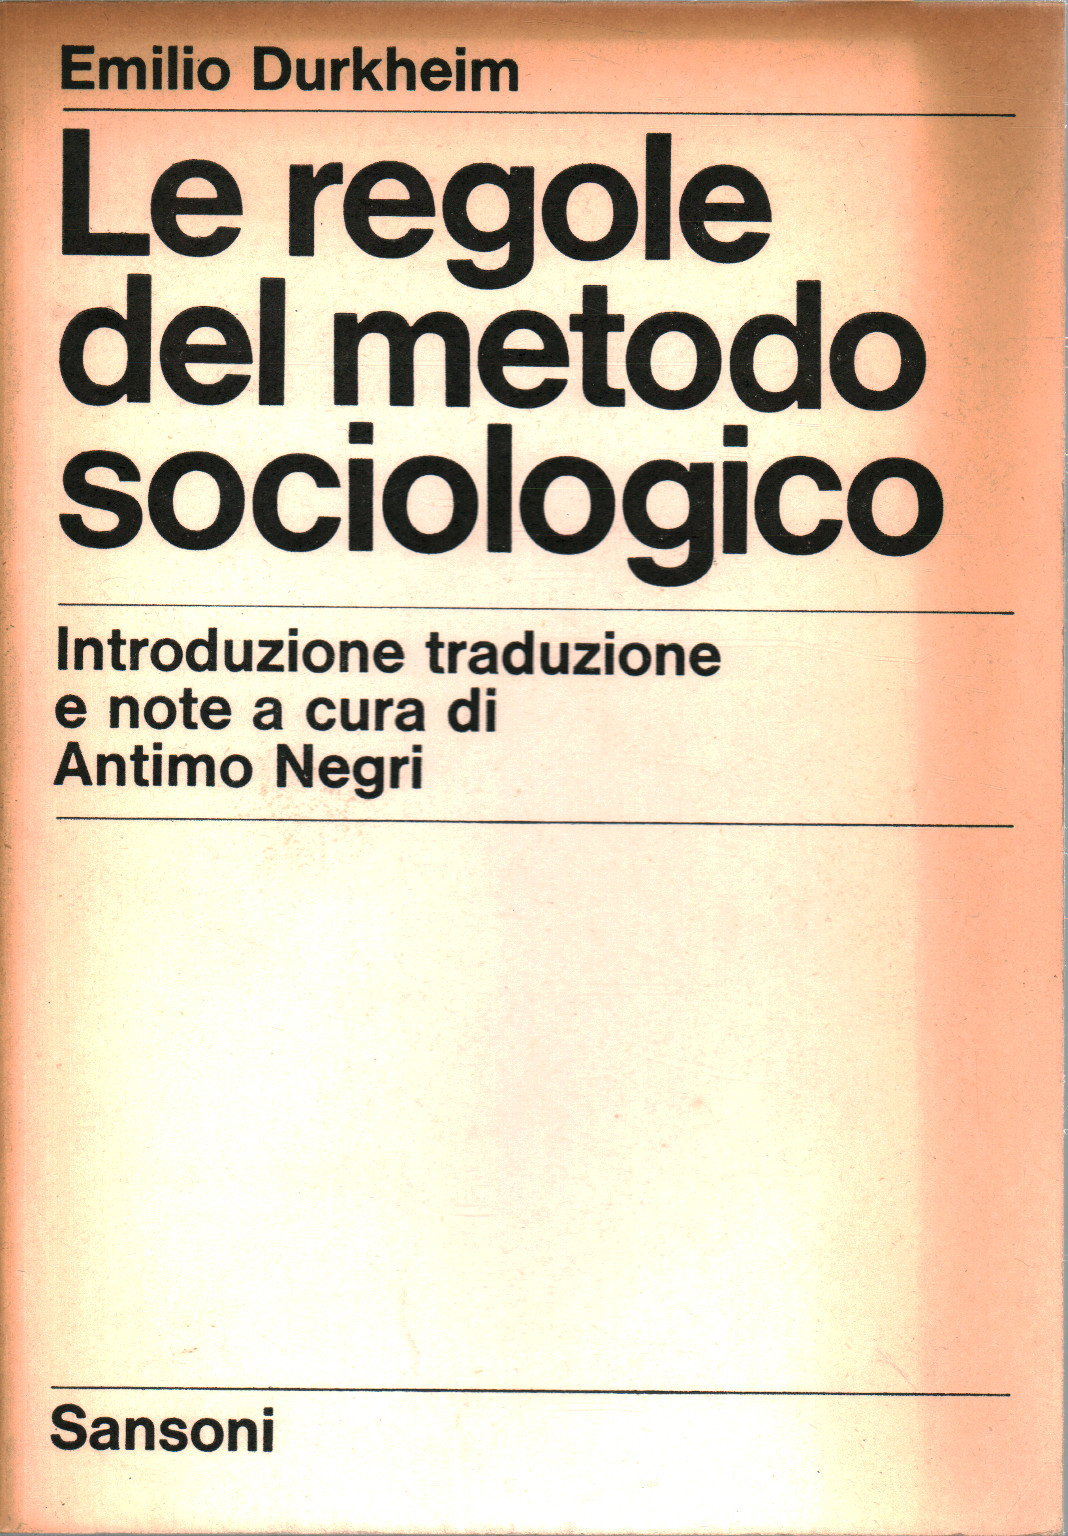 The rules of the sociological method, s.a.